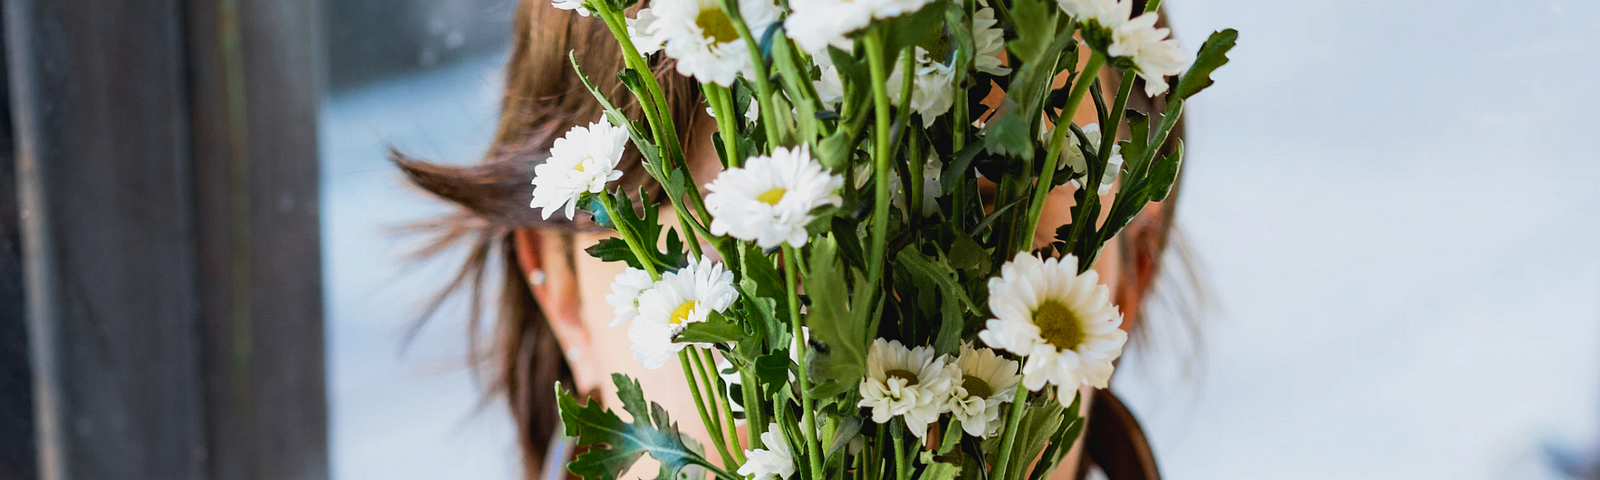 A woman holds up a bouquet of daisies in front of her face.